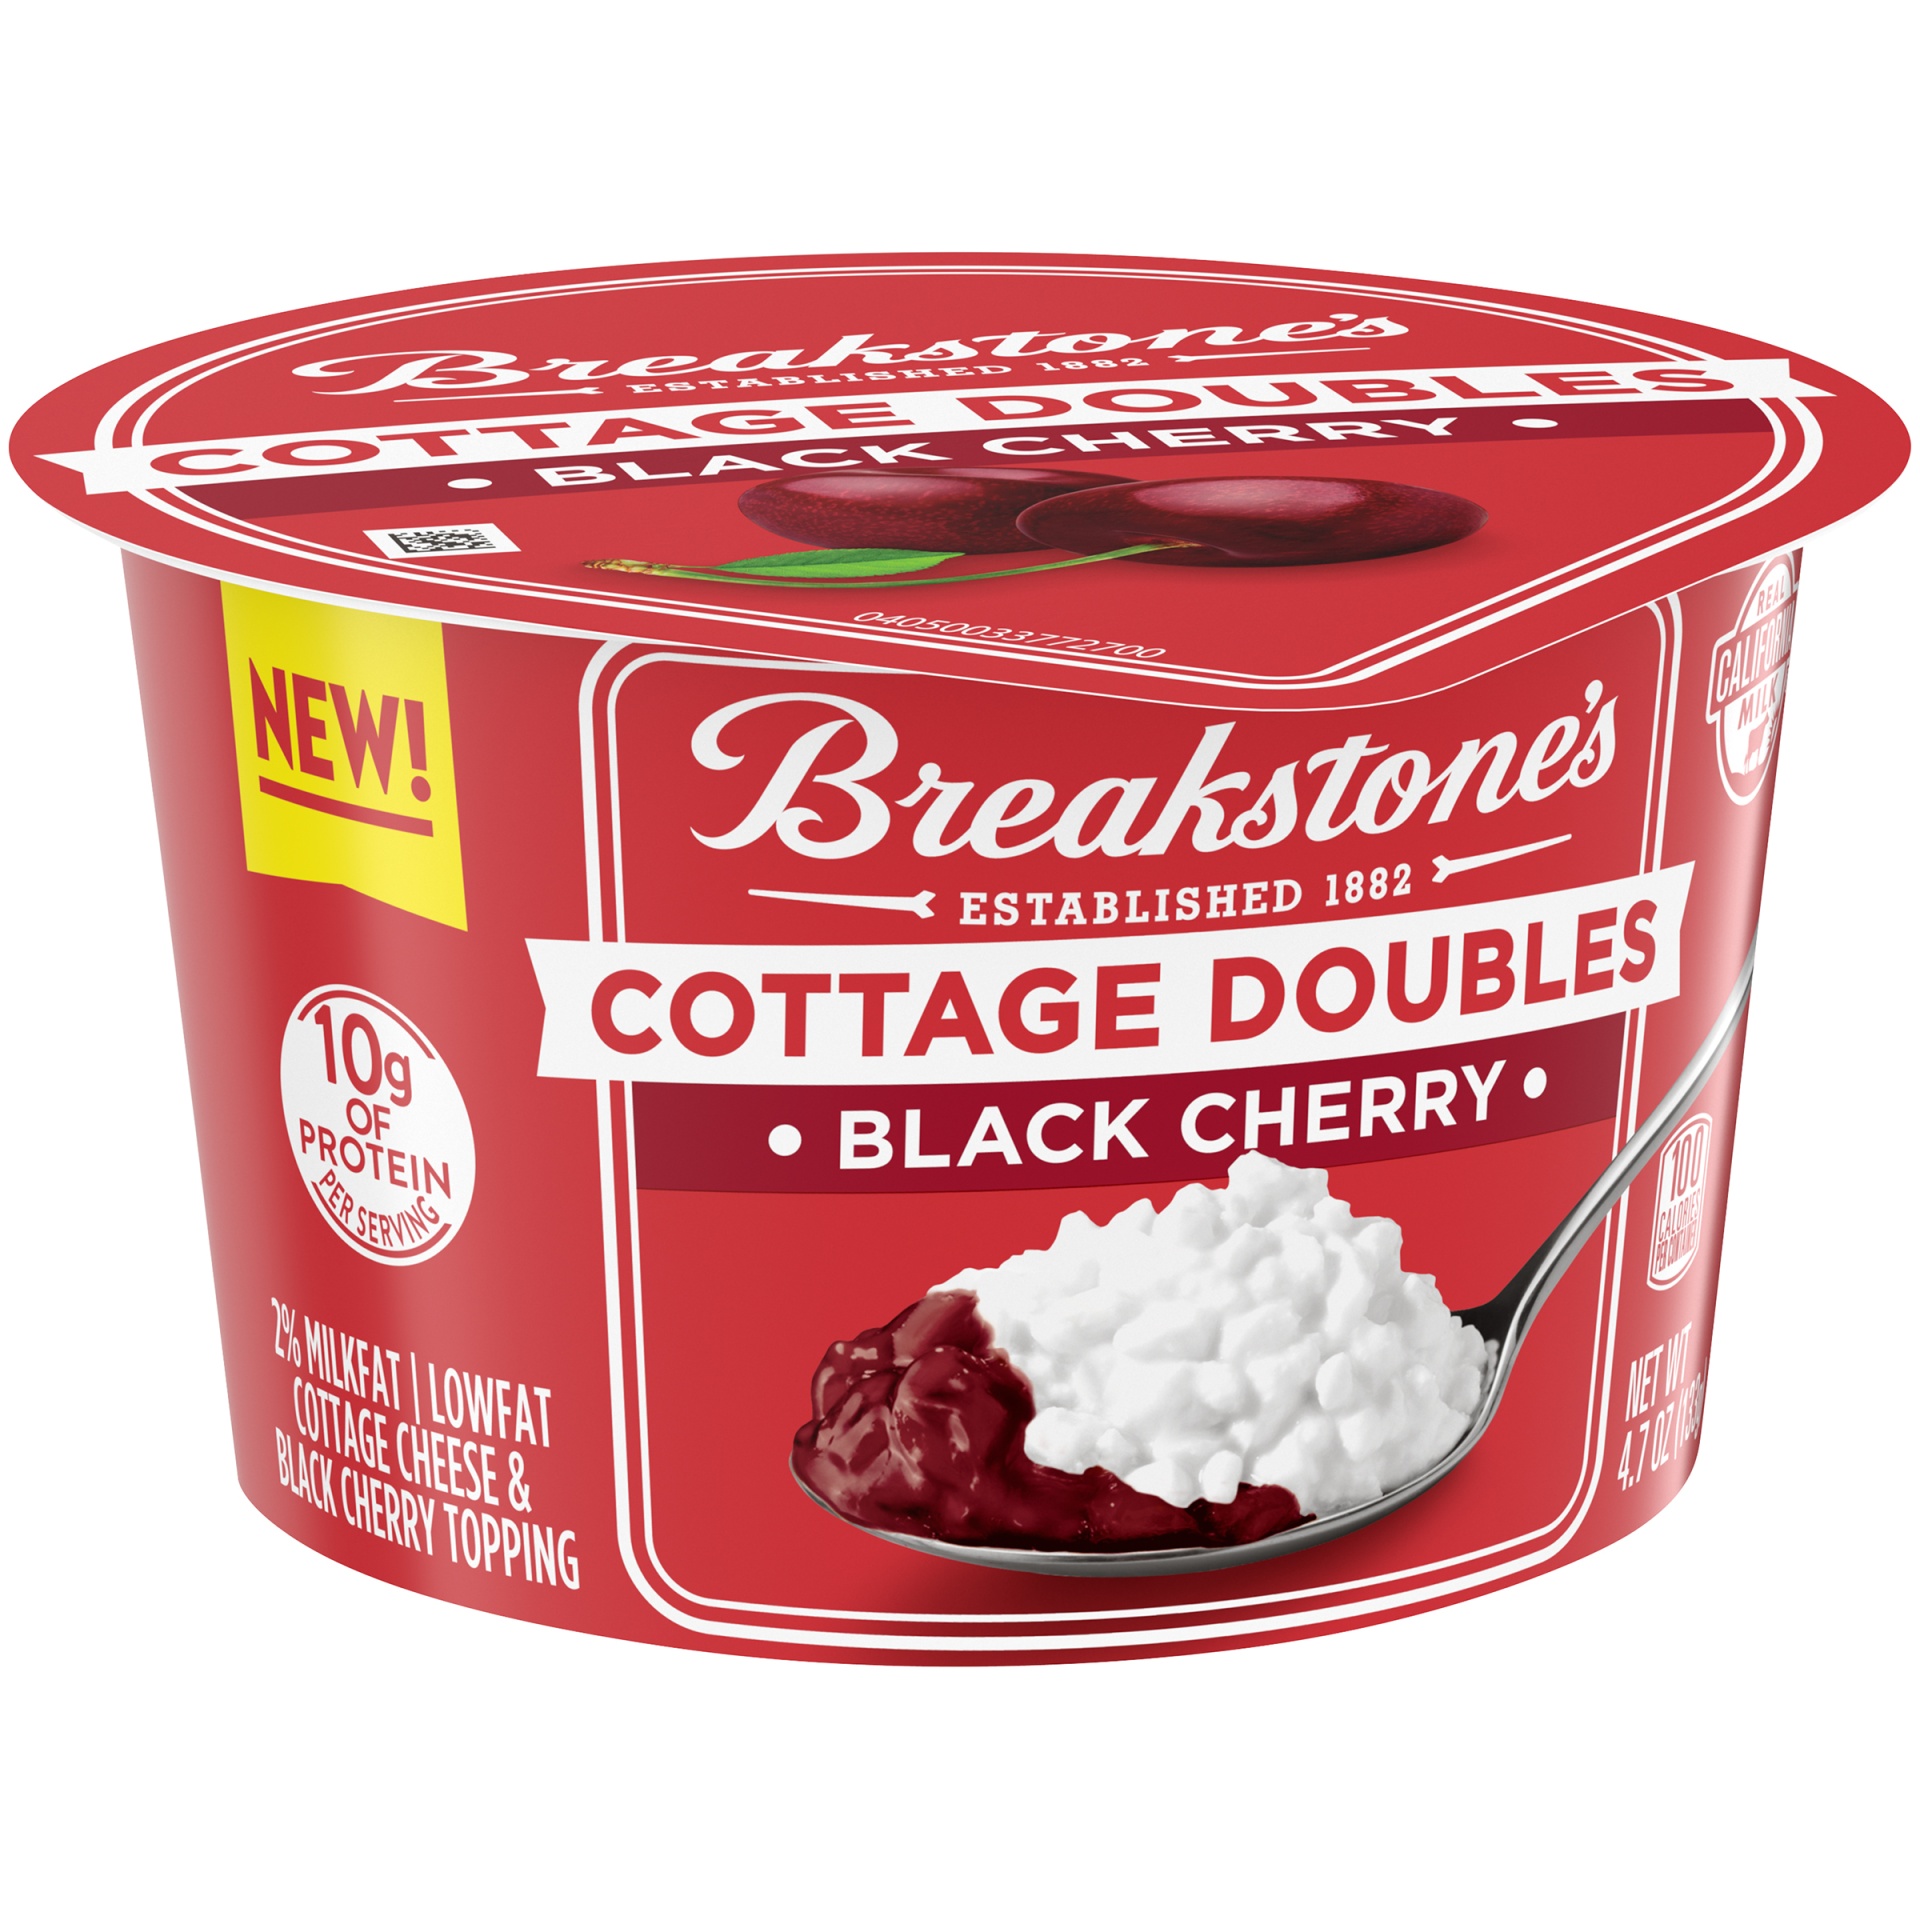 slide 2 of 6, Breakstone's Cottage Doubles Lowfat Cottage Cheese & Black Cherry Topping with 2% Milkfat Cup, 4.7 oz